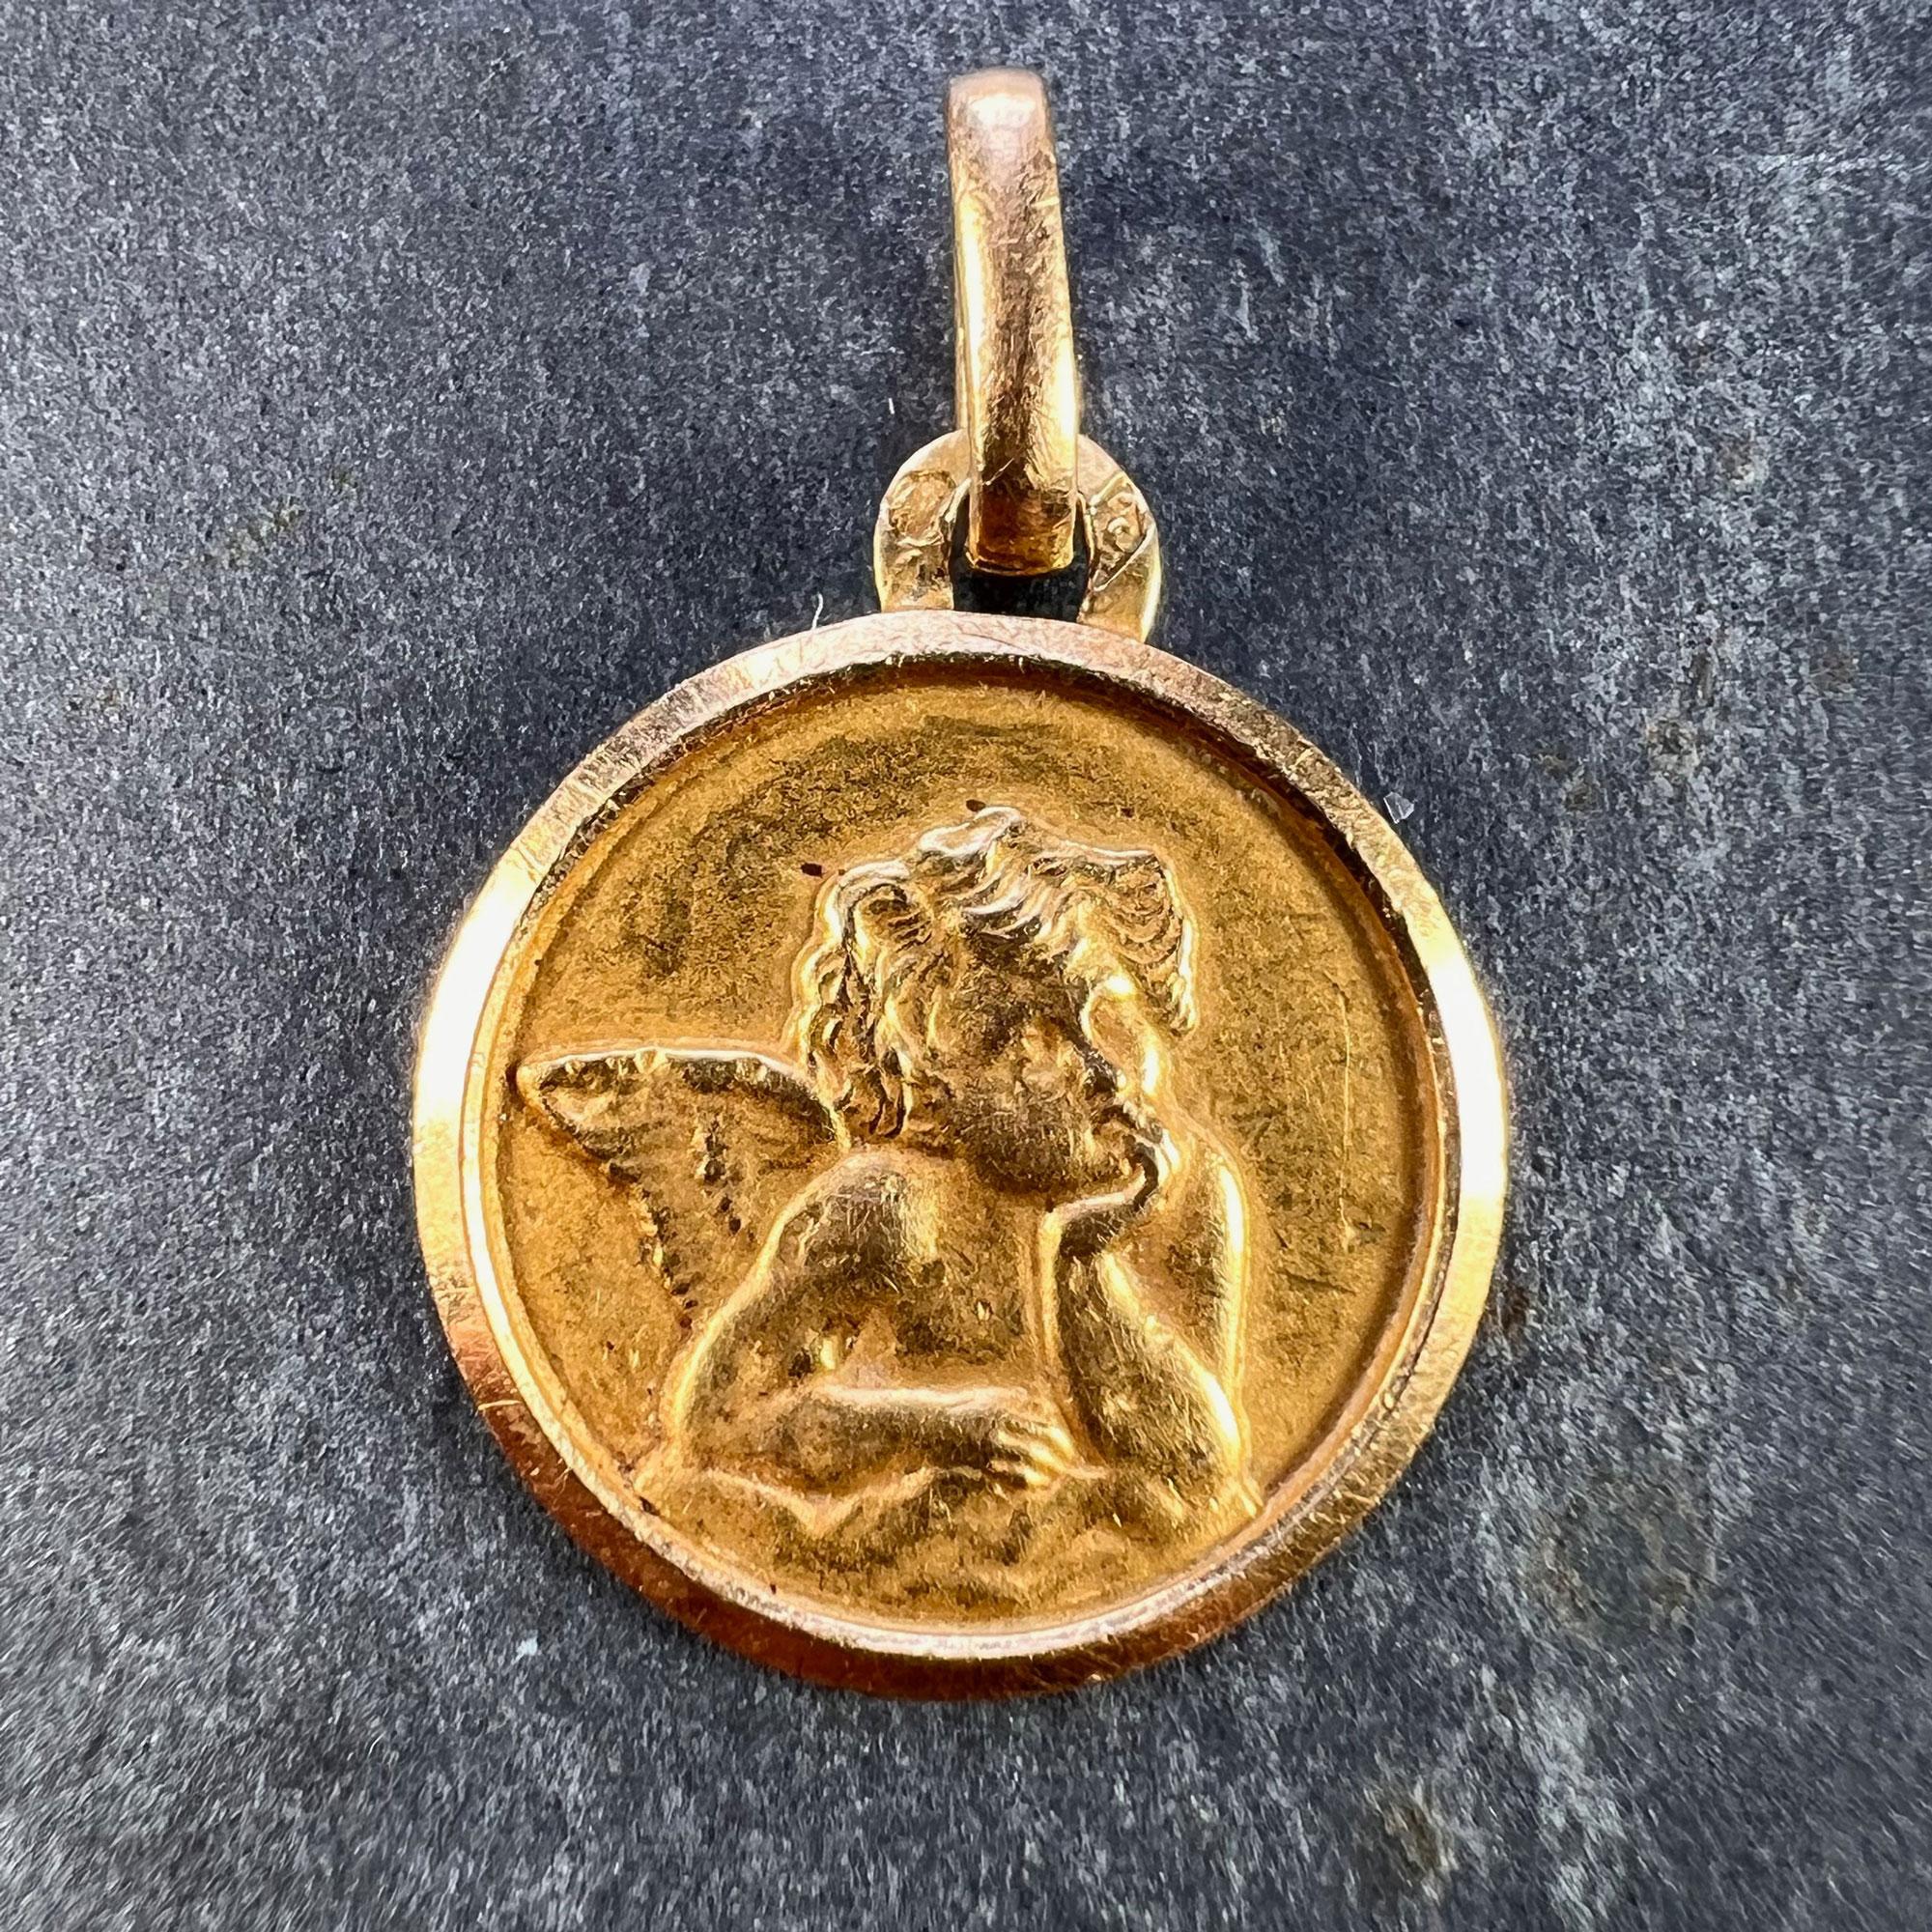 A French 18 karat (18K) yellow gold charm pendant designed as a medal depicting Rafael’s cherub within a raised frame. Engraved to the reverse with the date 1-9-66. Stamped with the eagle mark for 18 karat gold and French manufacture with maker's